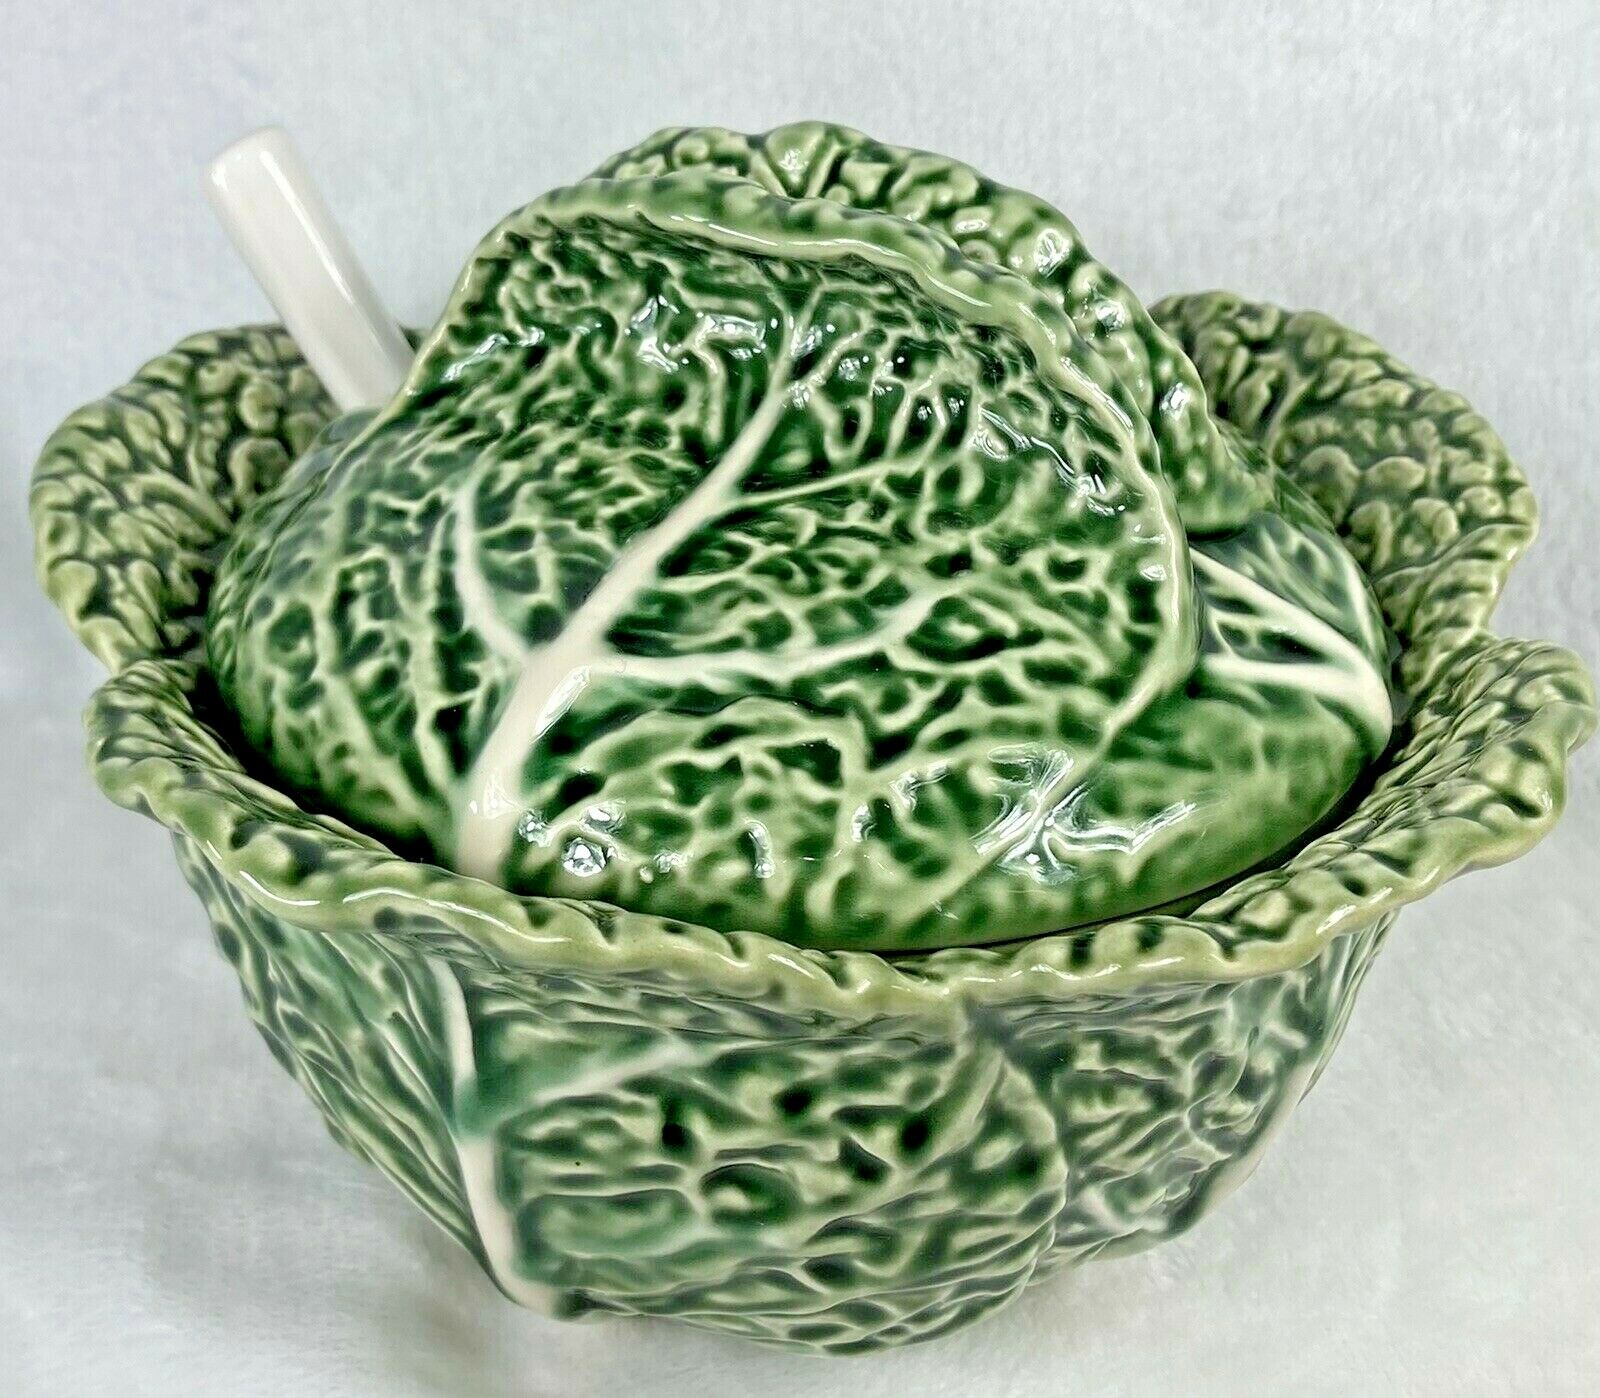 Cabbage Leaf Soup Tureen With Ladle Bordallo Pinheiro Portugal 7.5" Wide 4" Tall